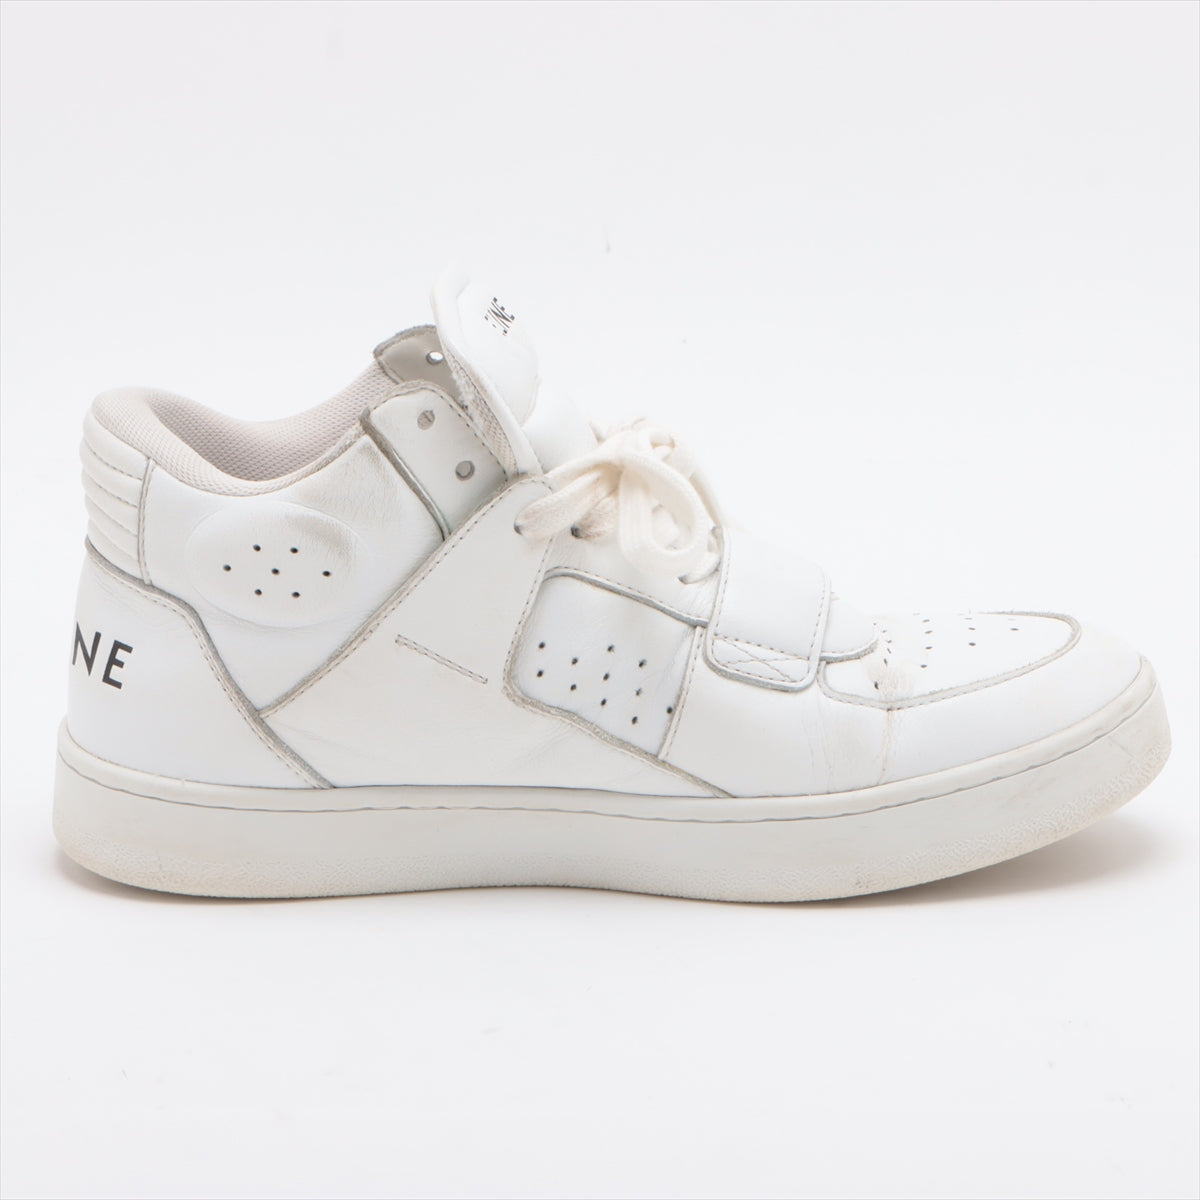 CELINE Leather High-top Sneakers 36 Ladies' White CT-02 RM0241 Is there a replacement string